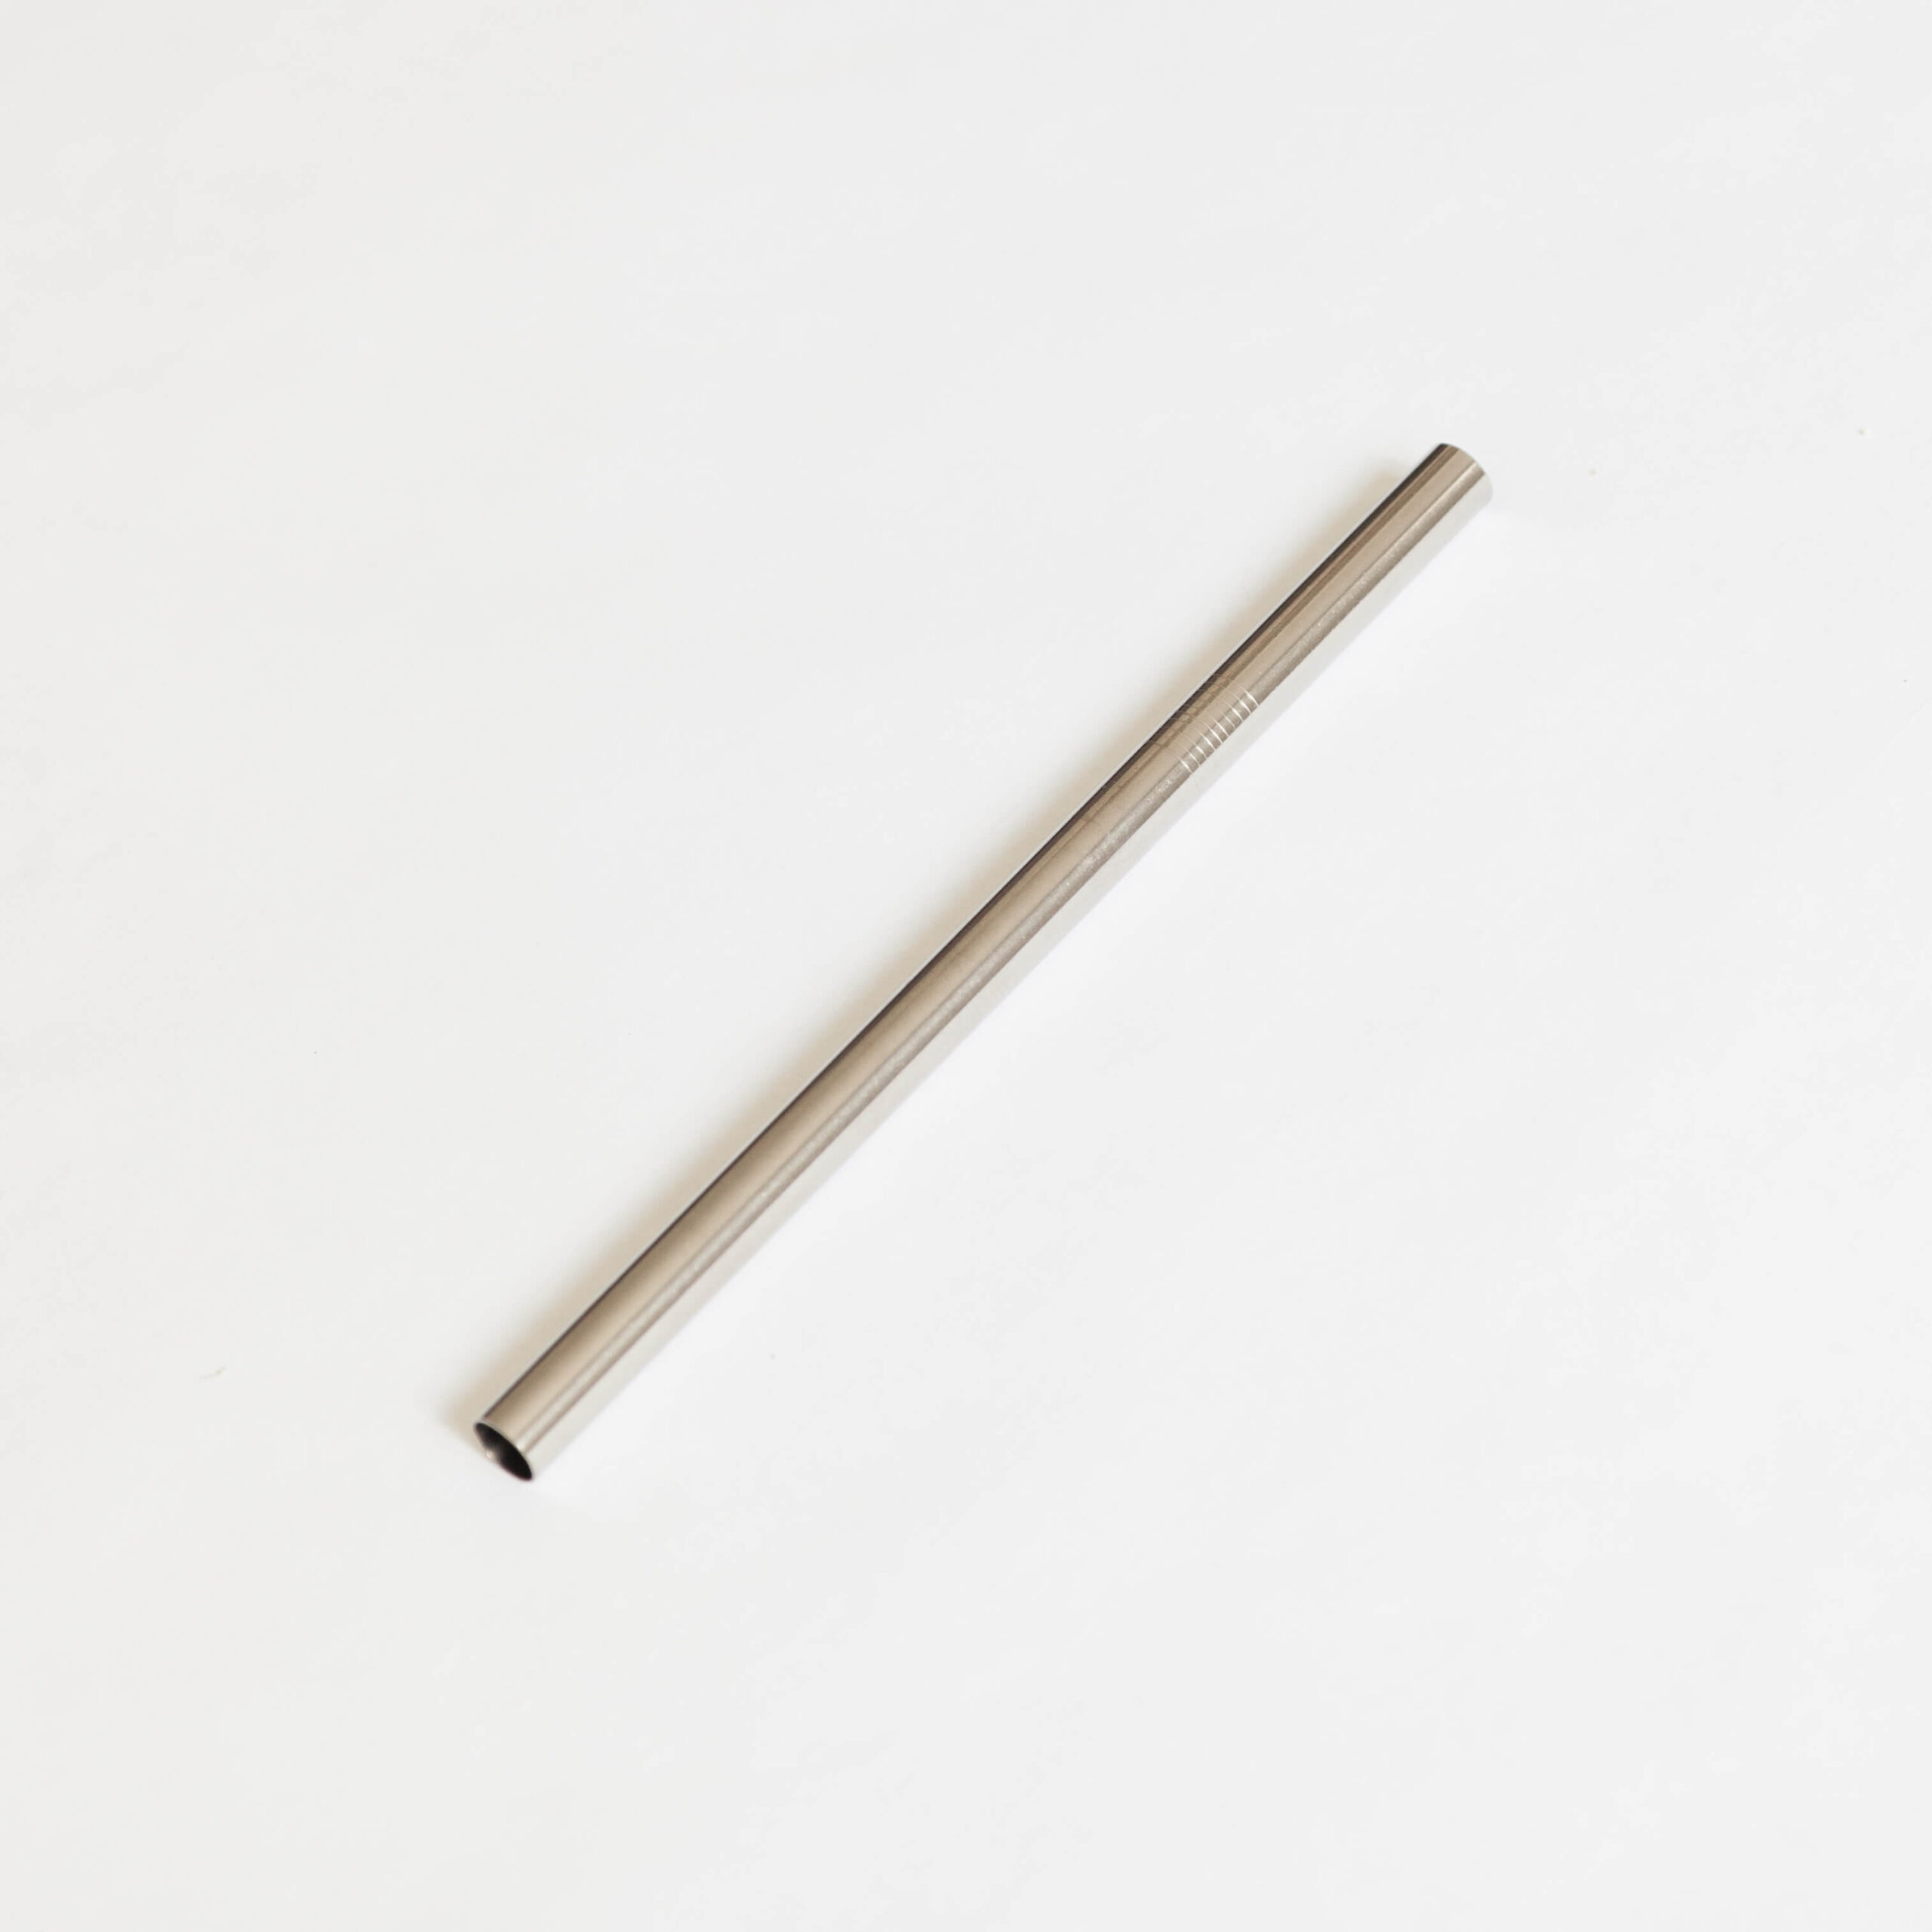 https://thesourcezero.com/wp-content/uploads/2020/05/Stainless-Steel-Boba-Straw-2-scaled.jpg